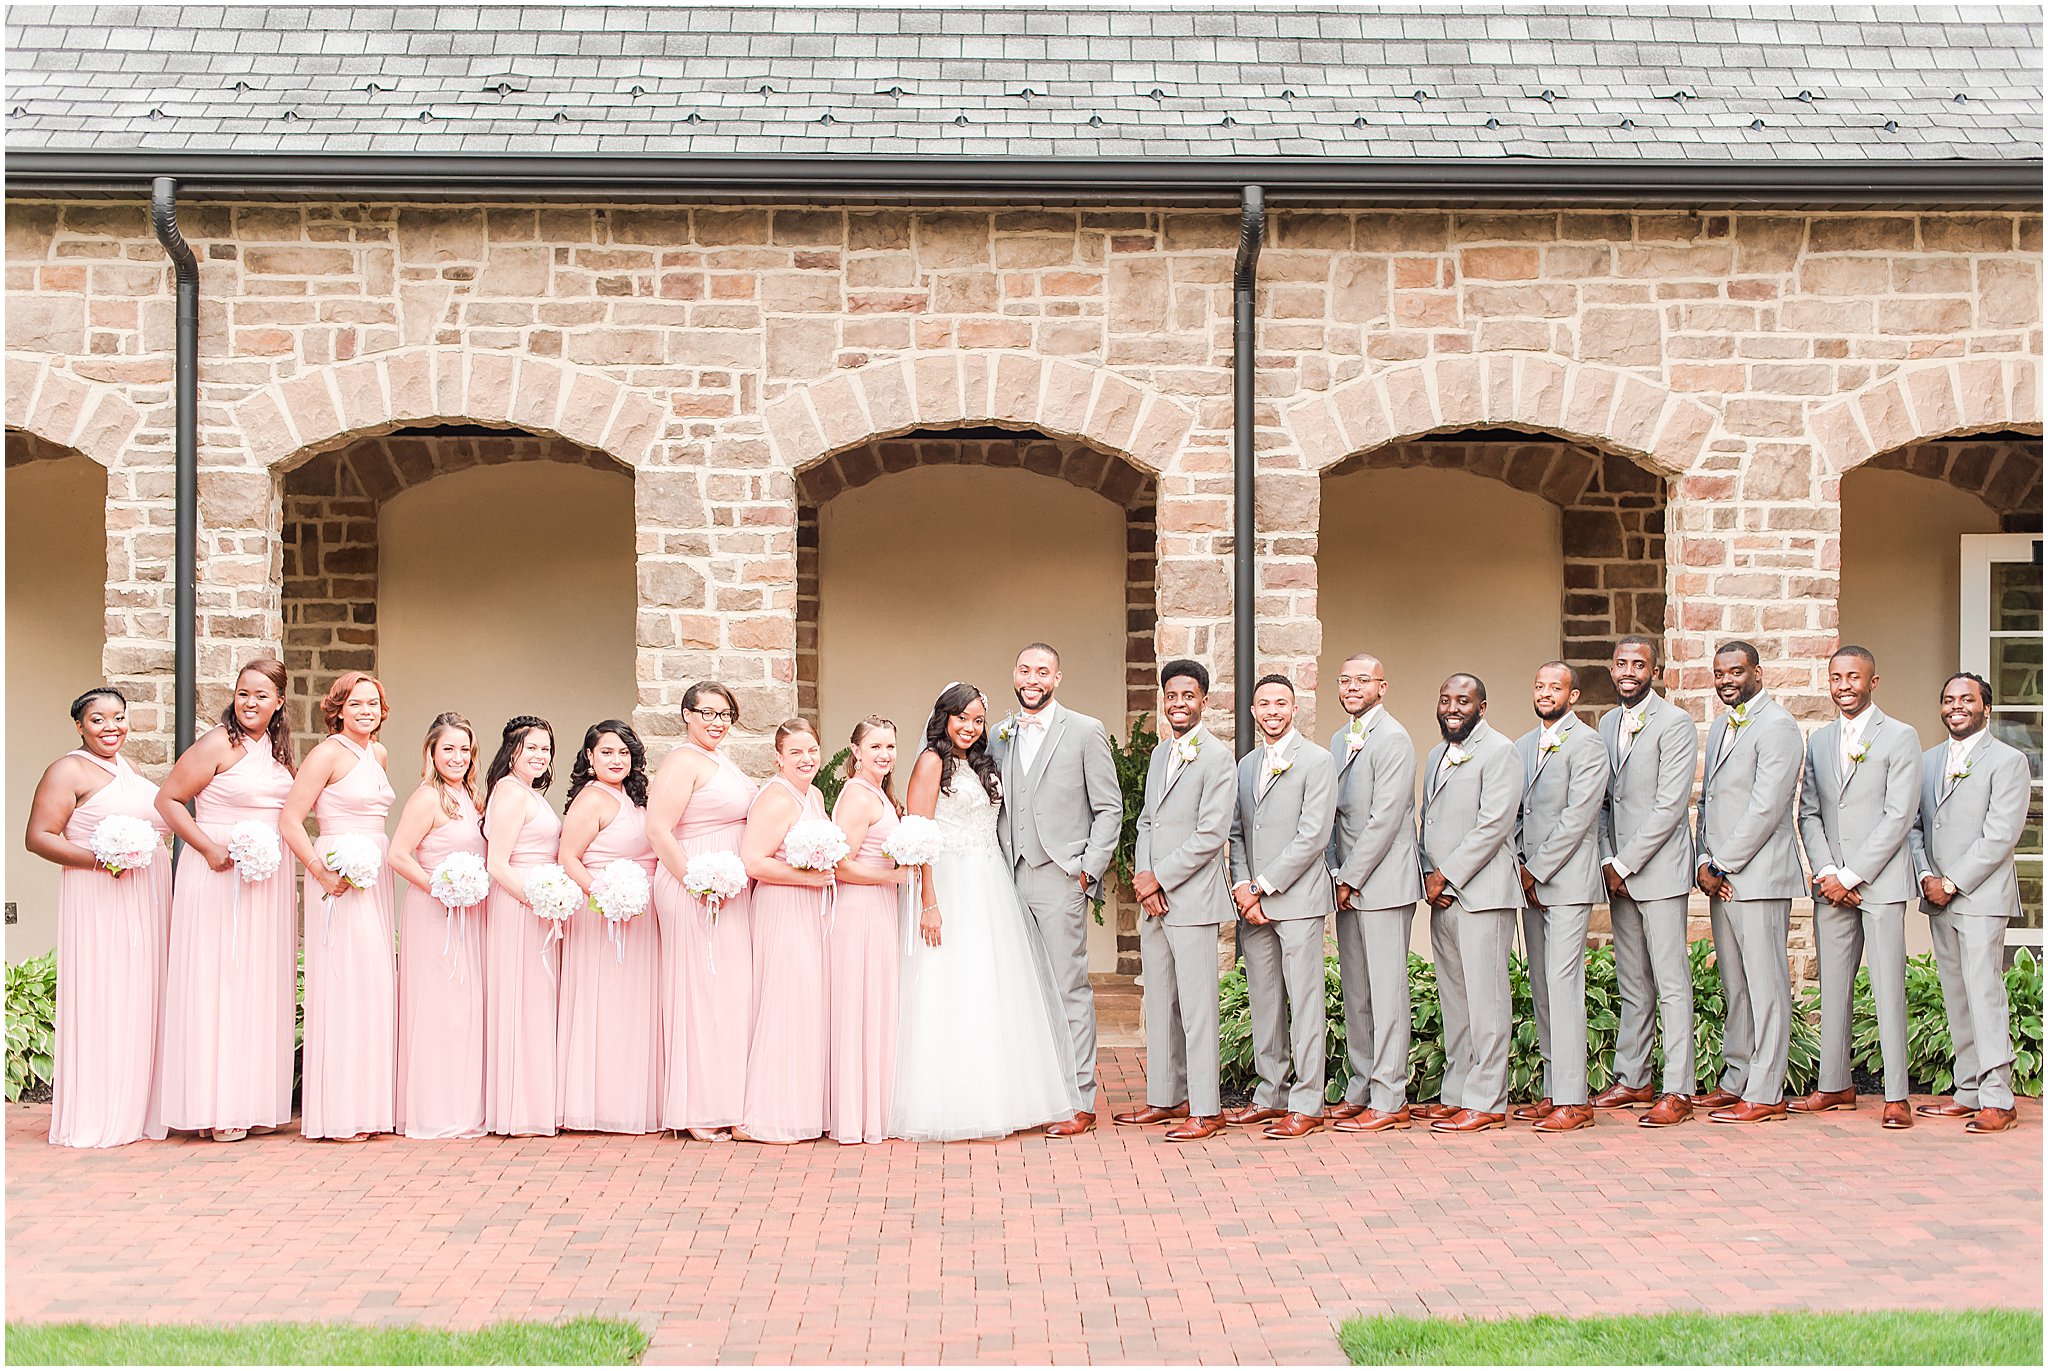 Bridal party portraits at Pinnacle Golf Club | Courtney Carney Photography